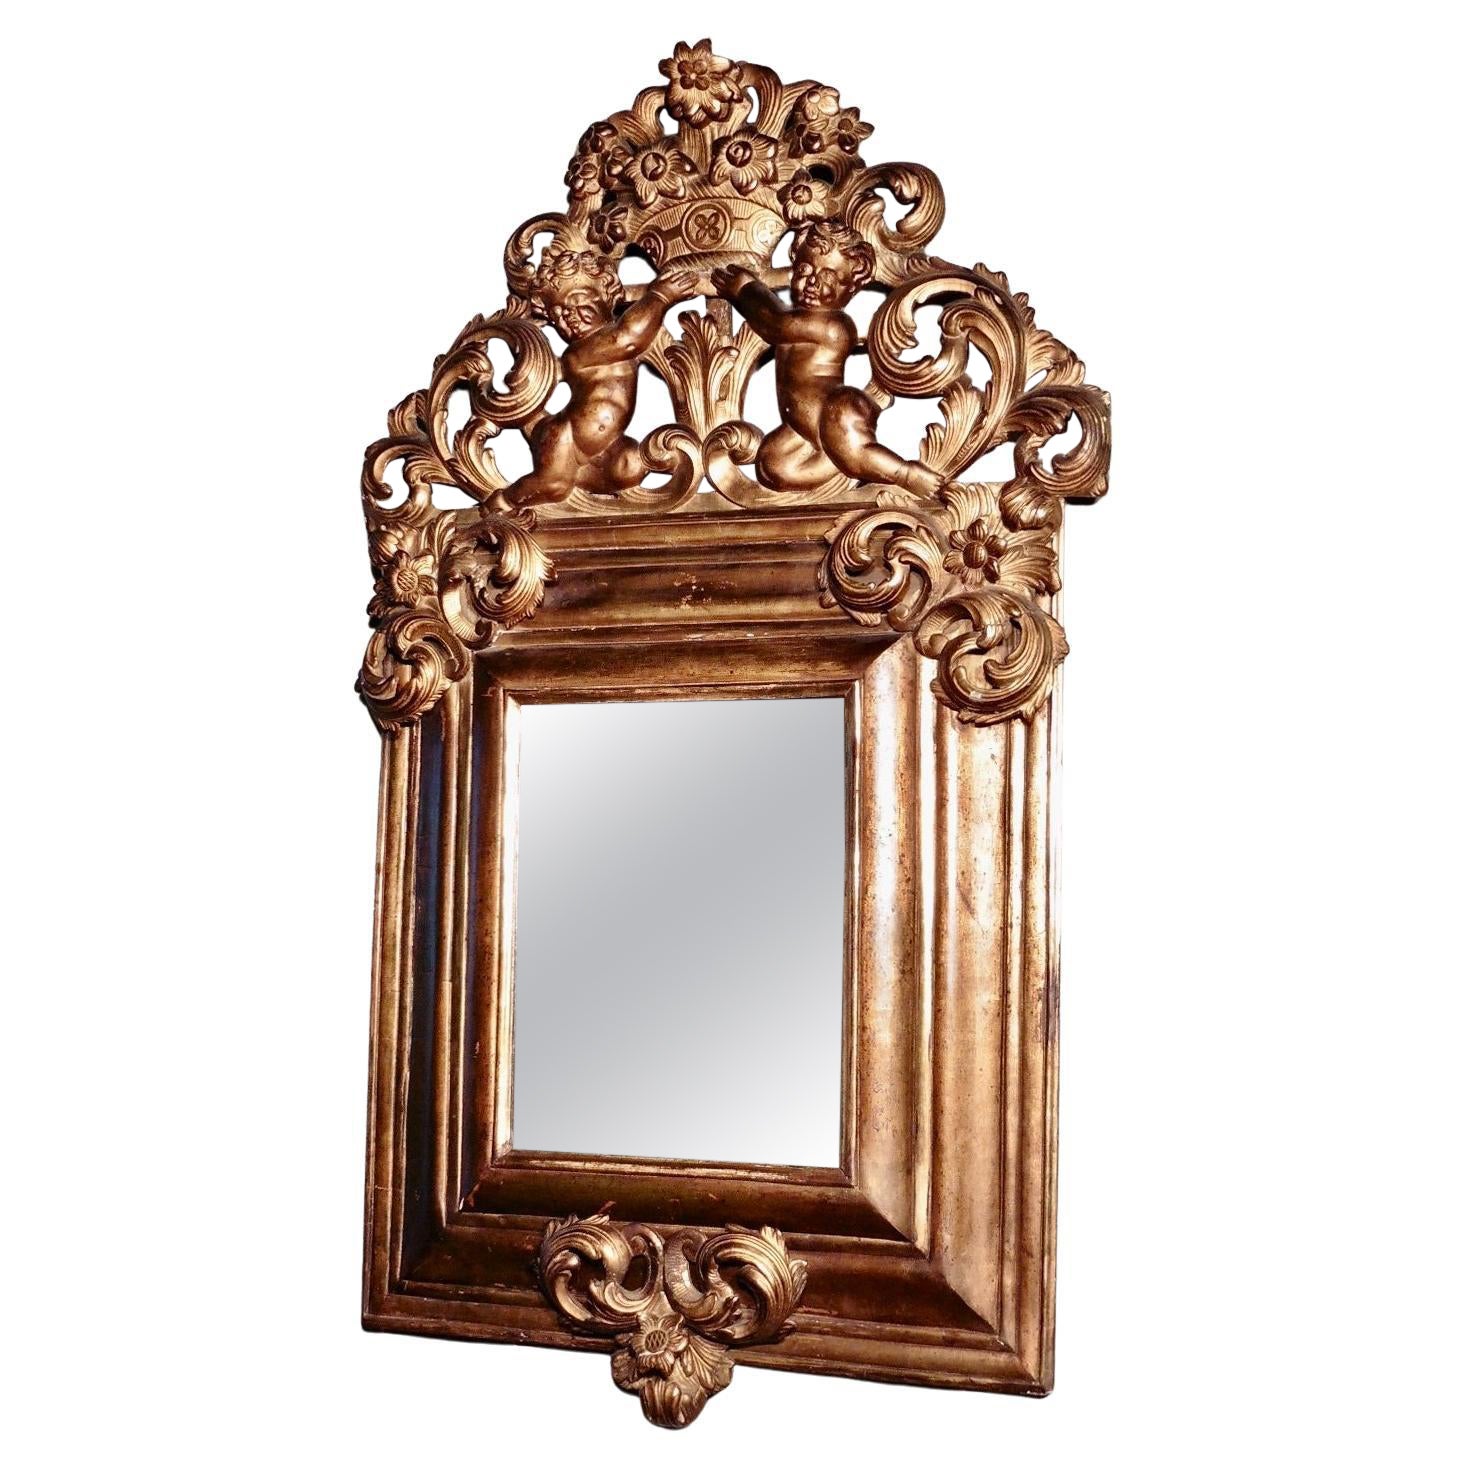 Superb Large Early 19th Century Carved Gilt Mirror